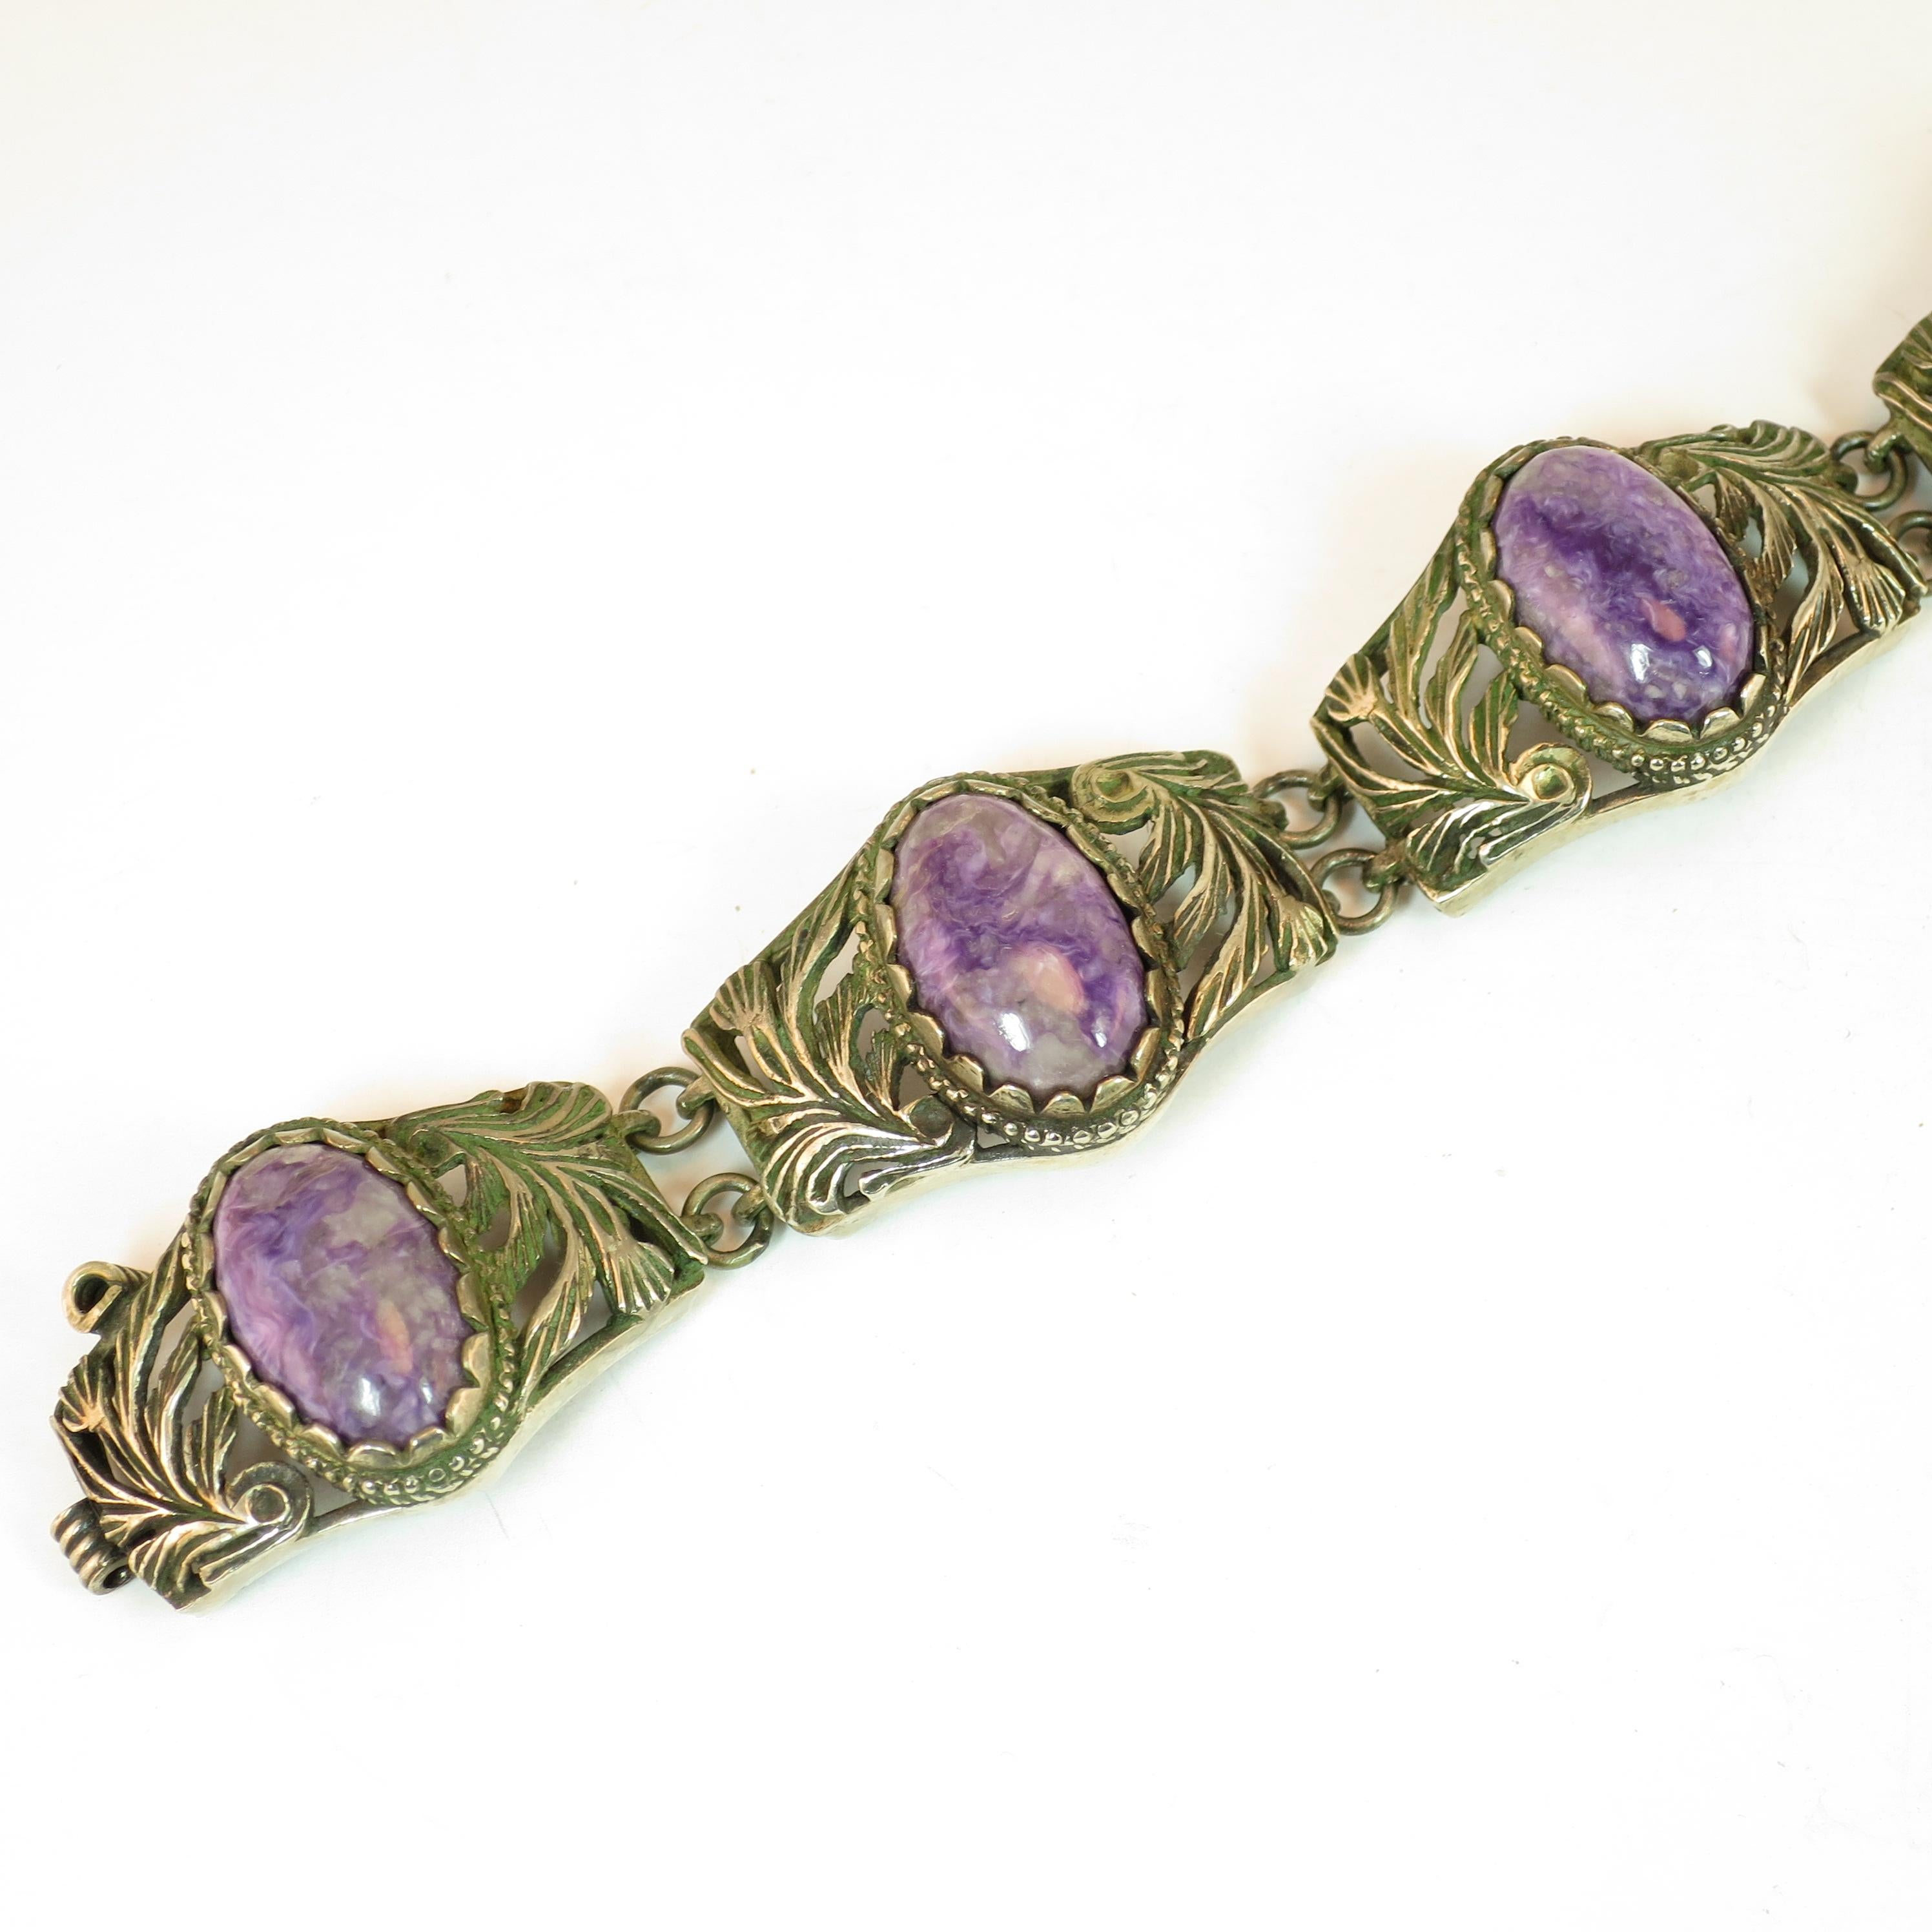 Offered here is a Mid-Victorian link bracelet of Chinese export silver and amethyst from the 1860s. The five curved links are joined by double o-rings; each link is centered with an oval cabochon of polished raw-gem amethyst in a scalloped bezel